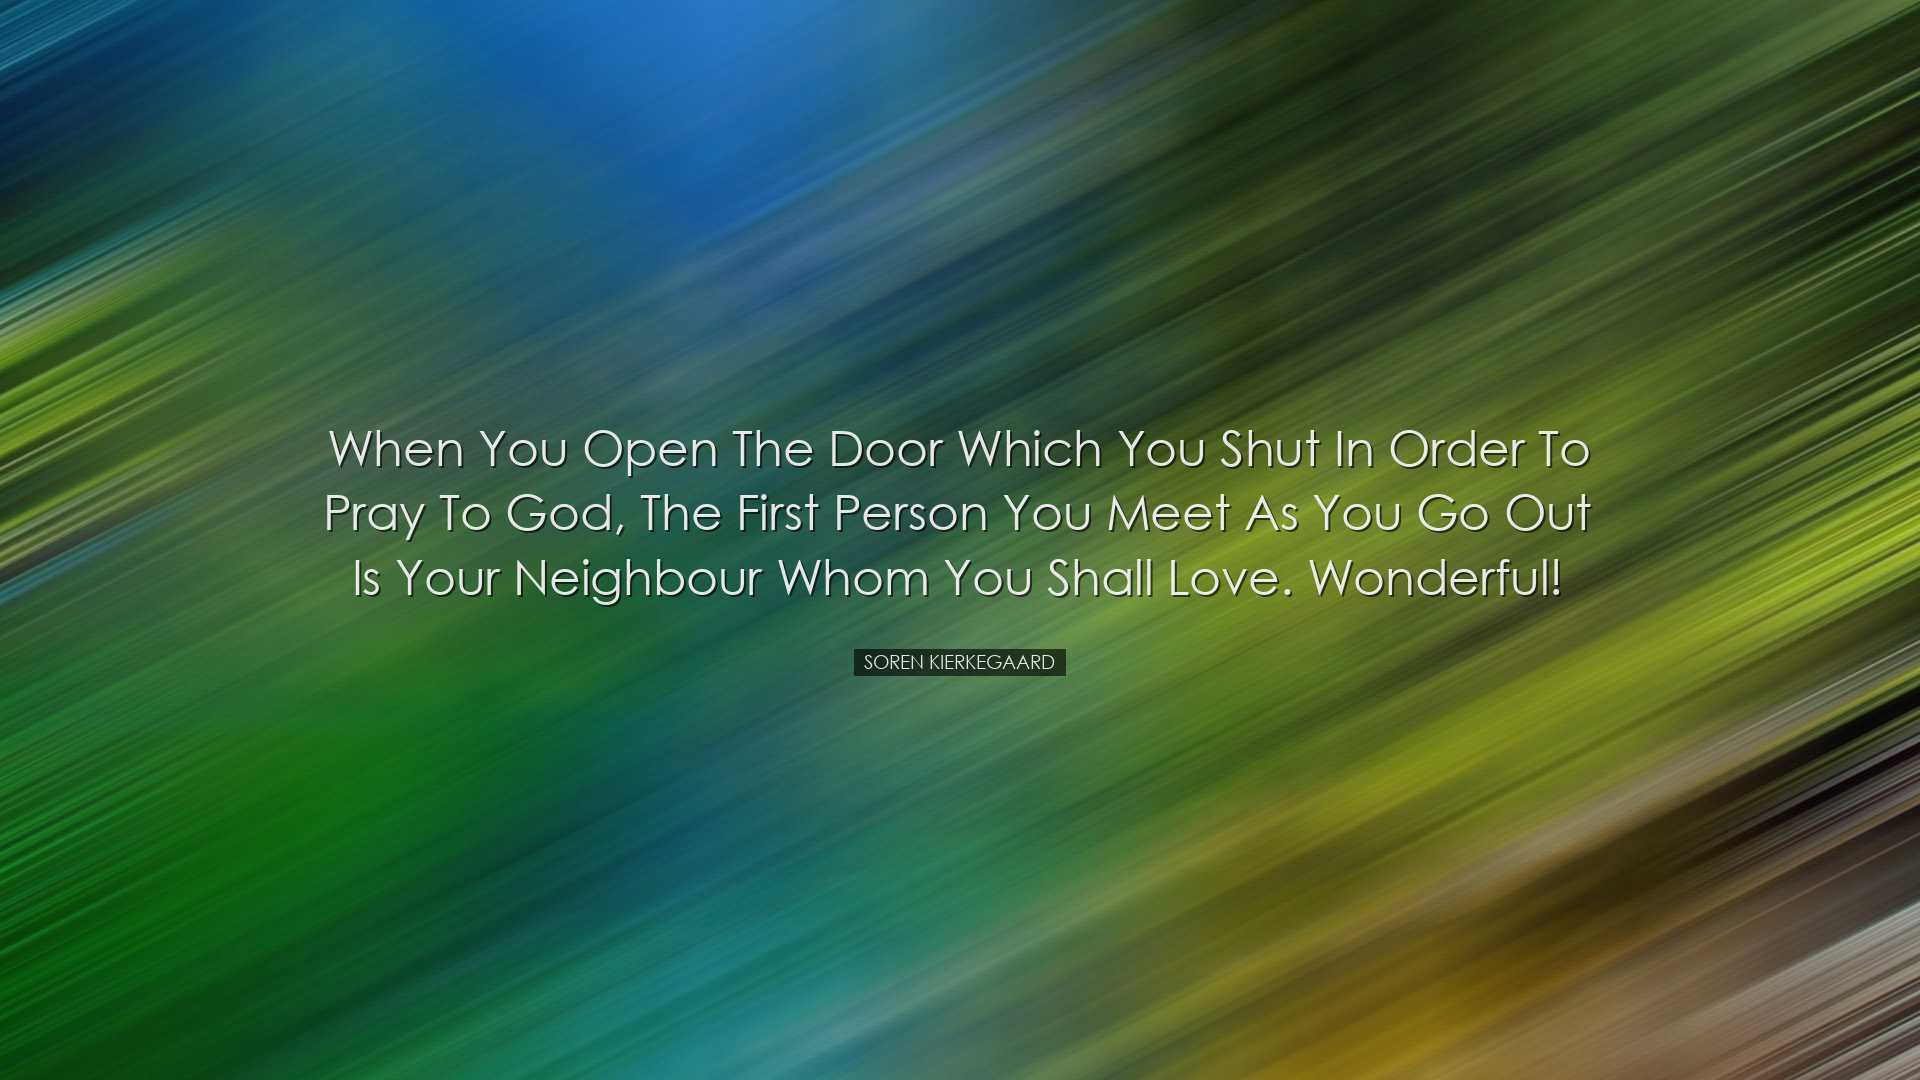 When you open the door which you shut in order to pray to God, the